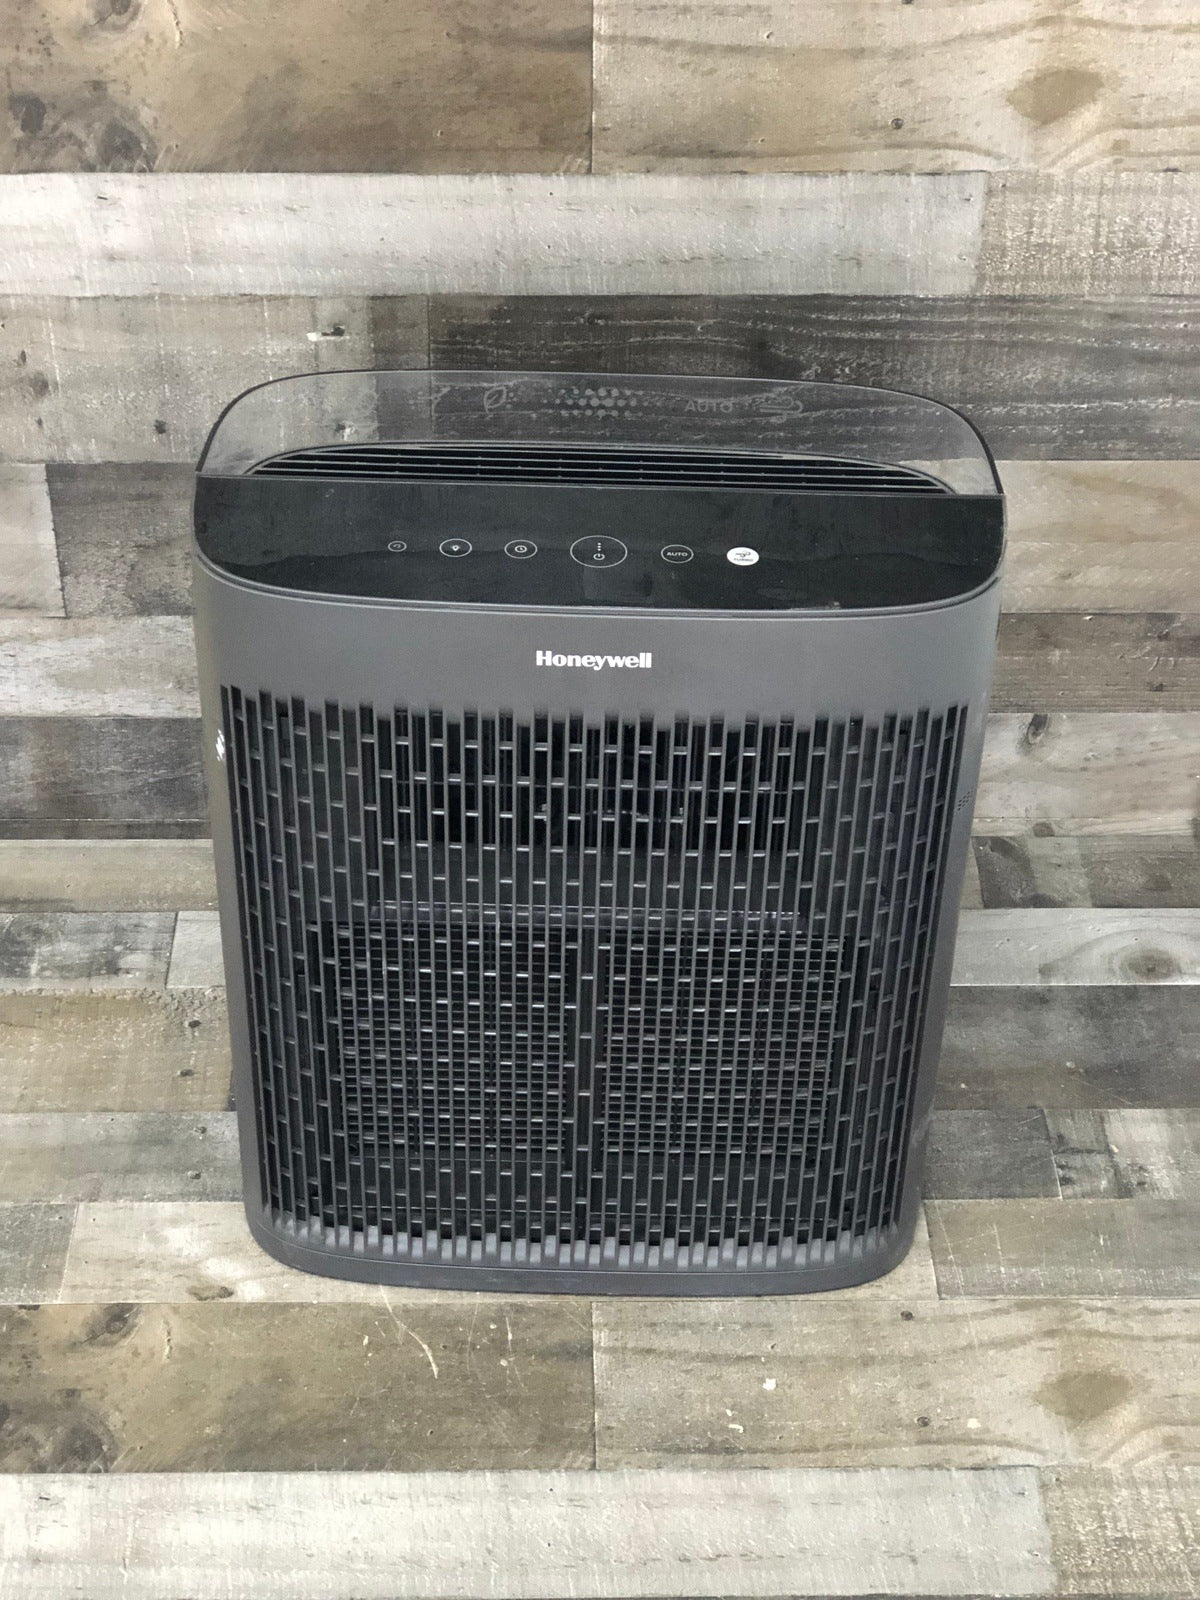 Honeywell InSight HEPA Air Purifier with Air Quality Indicator and Auto Mode, Extra-Large Rooms, Bedrooms, Home 500 sq ft , Black - Reduces Airborne Allergens, Smoke, Dust, Pollen, HPA5300B